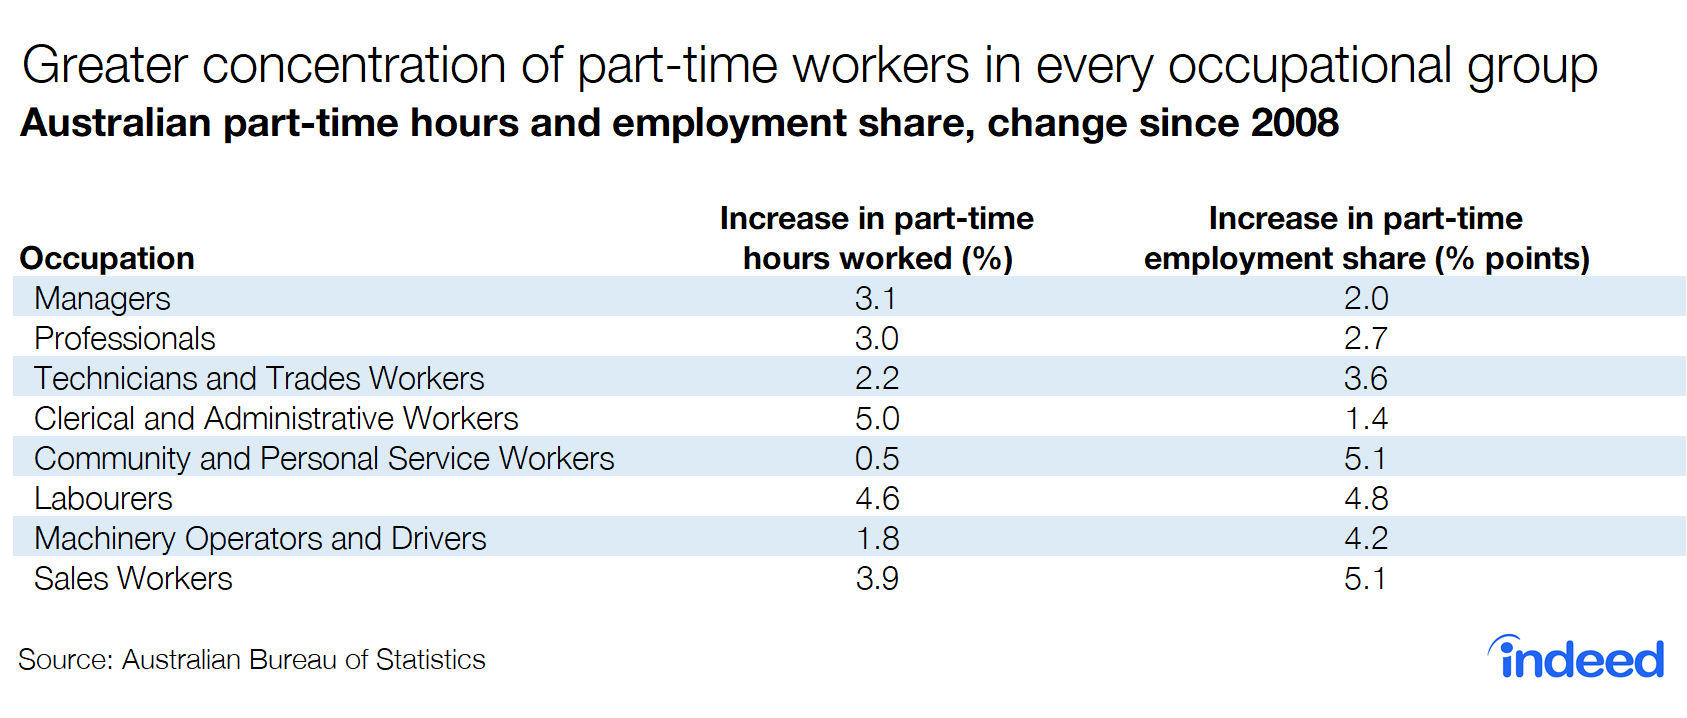 Greater concentration of part-time workers in every occupational group